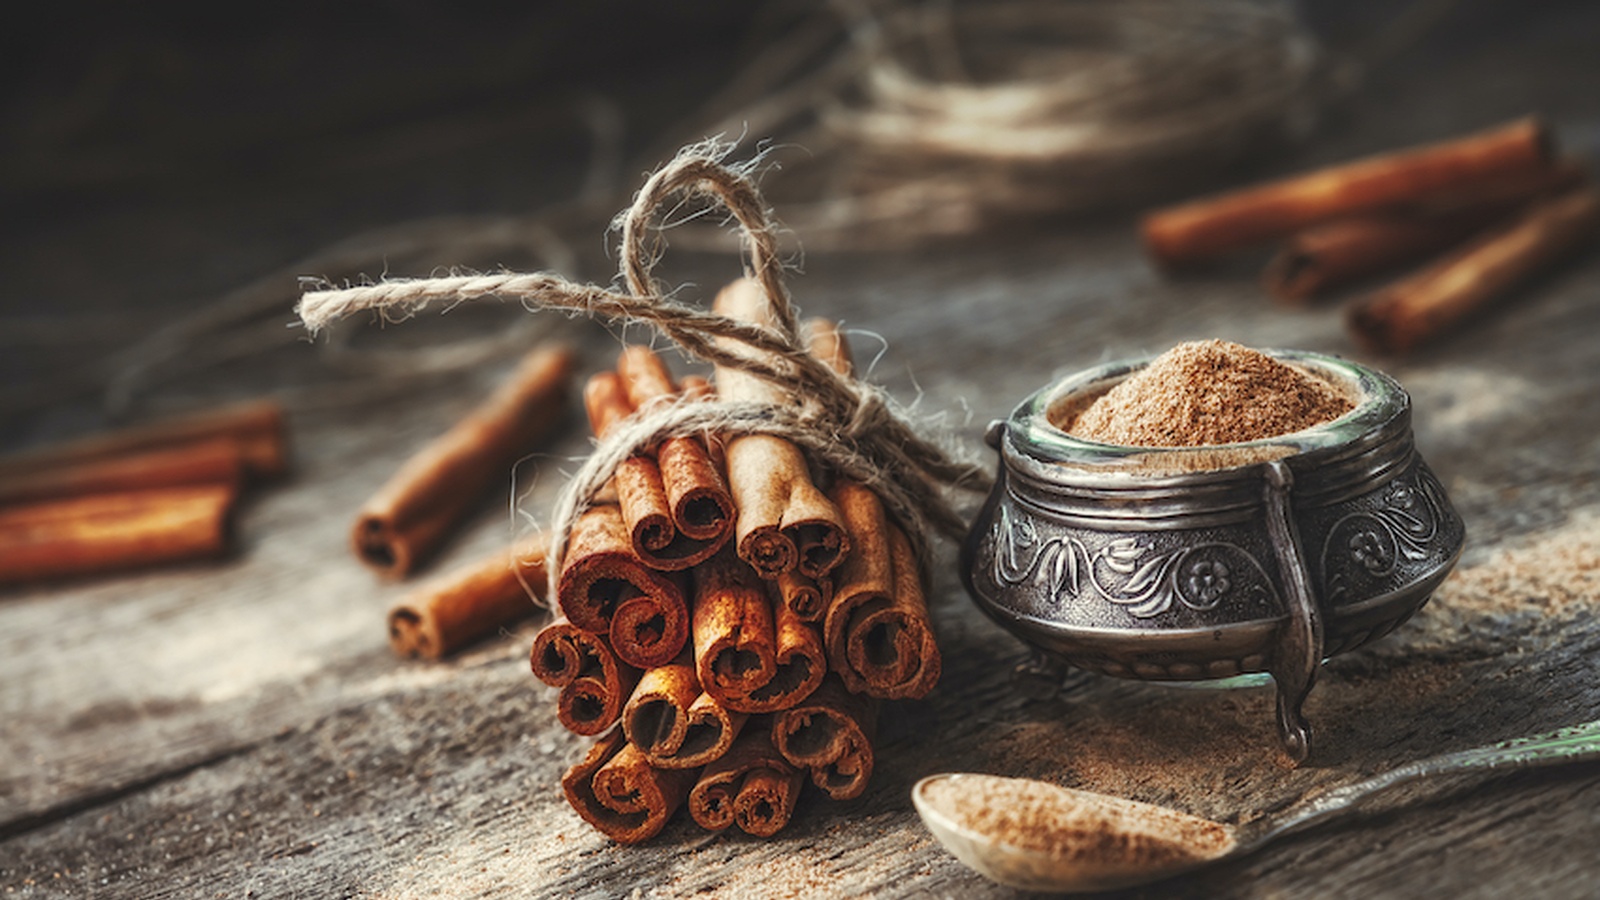 5 Health Benefits of Cinnamon and Our Favorite Recipes